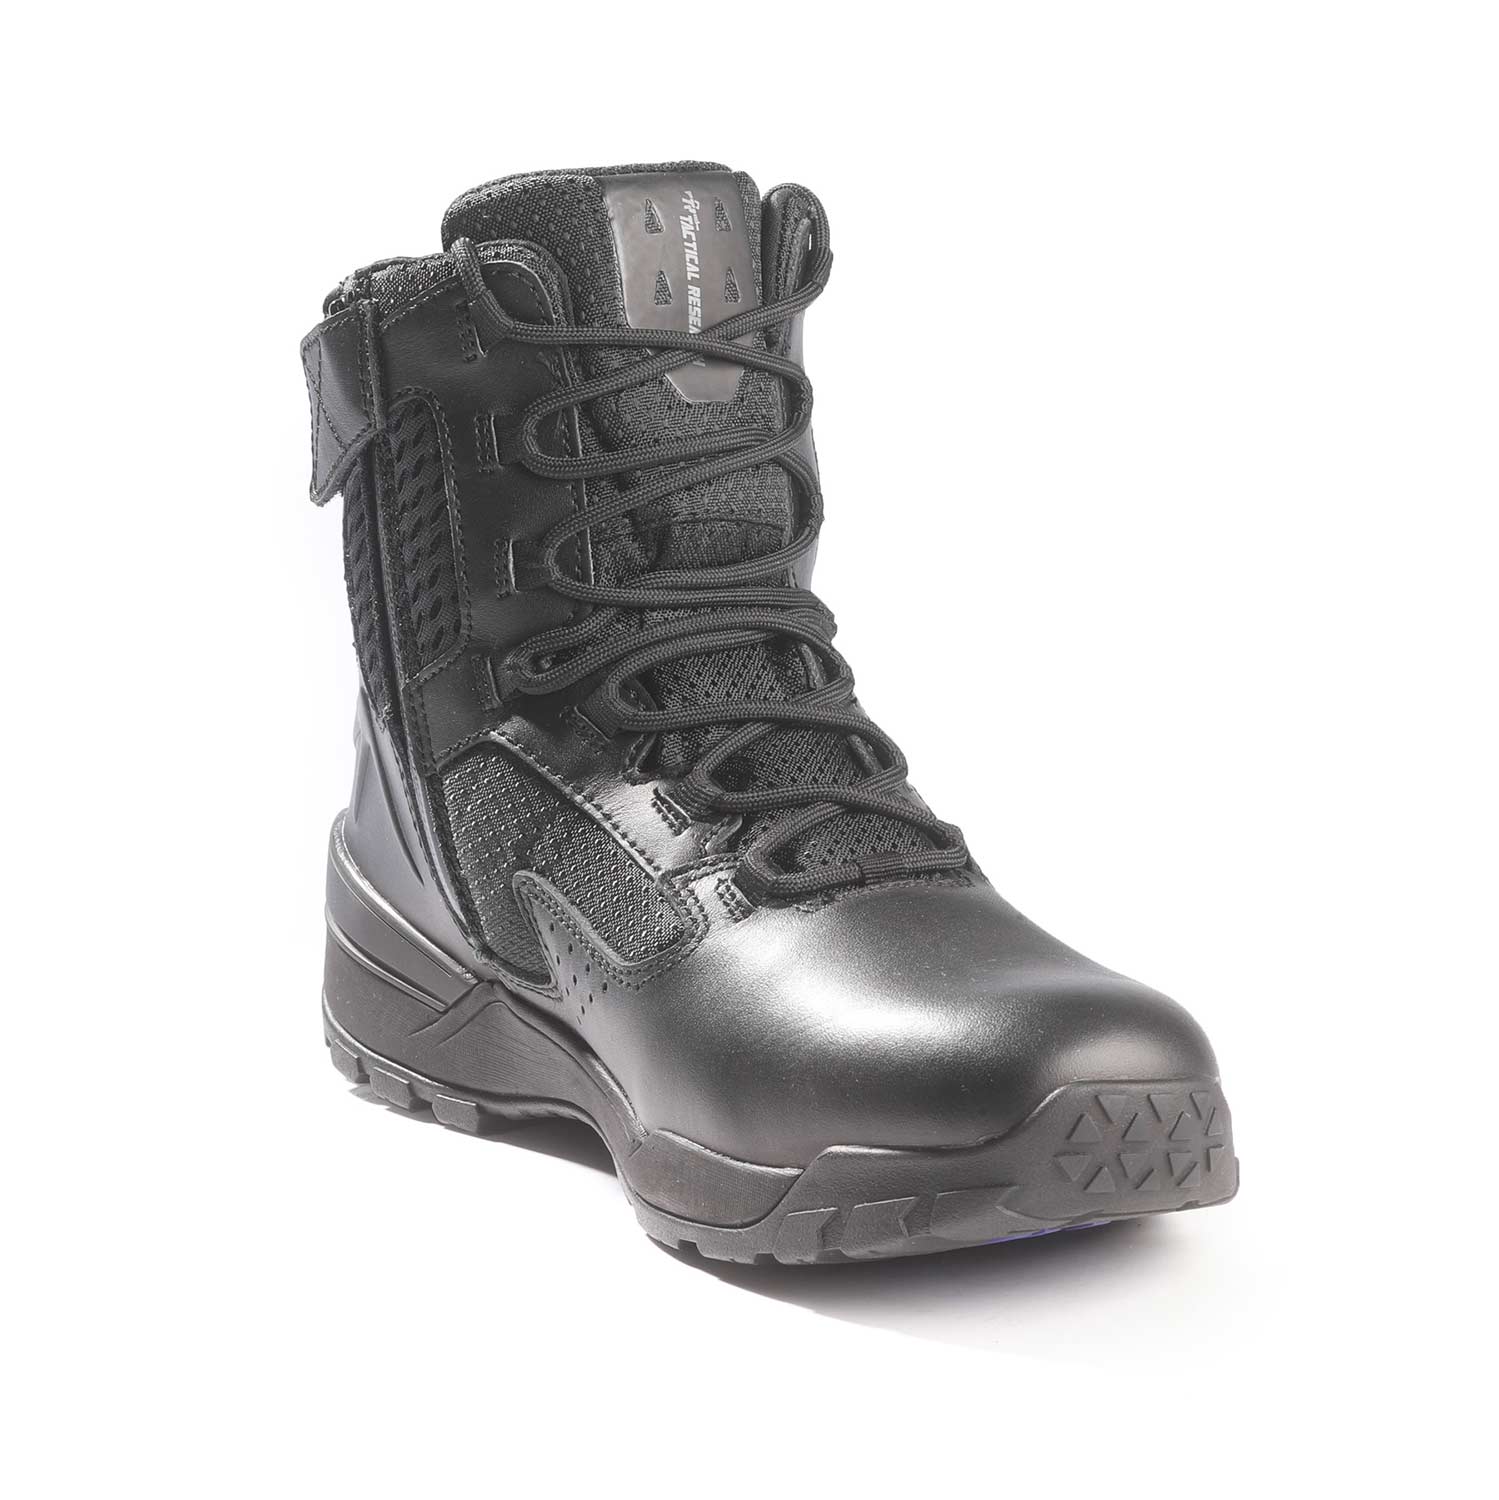 Tactical Research Ultralight 10-40 7" Side Zip Tactical Boot